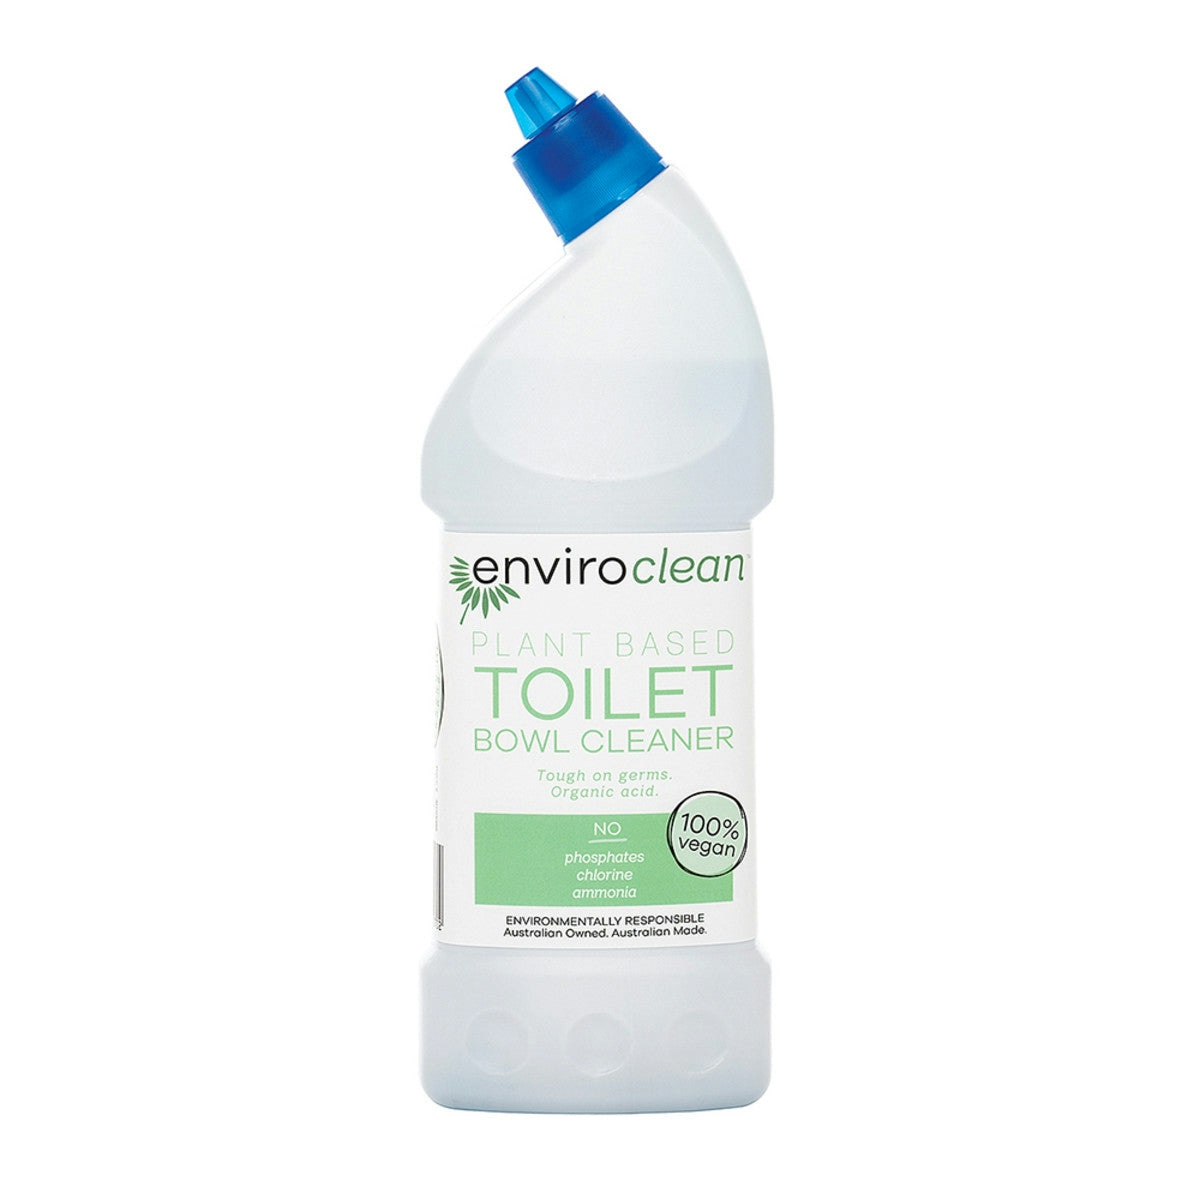 image of EnviroClean Plant Based Toilet Bowl Cleaner 500ml on white background